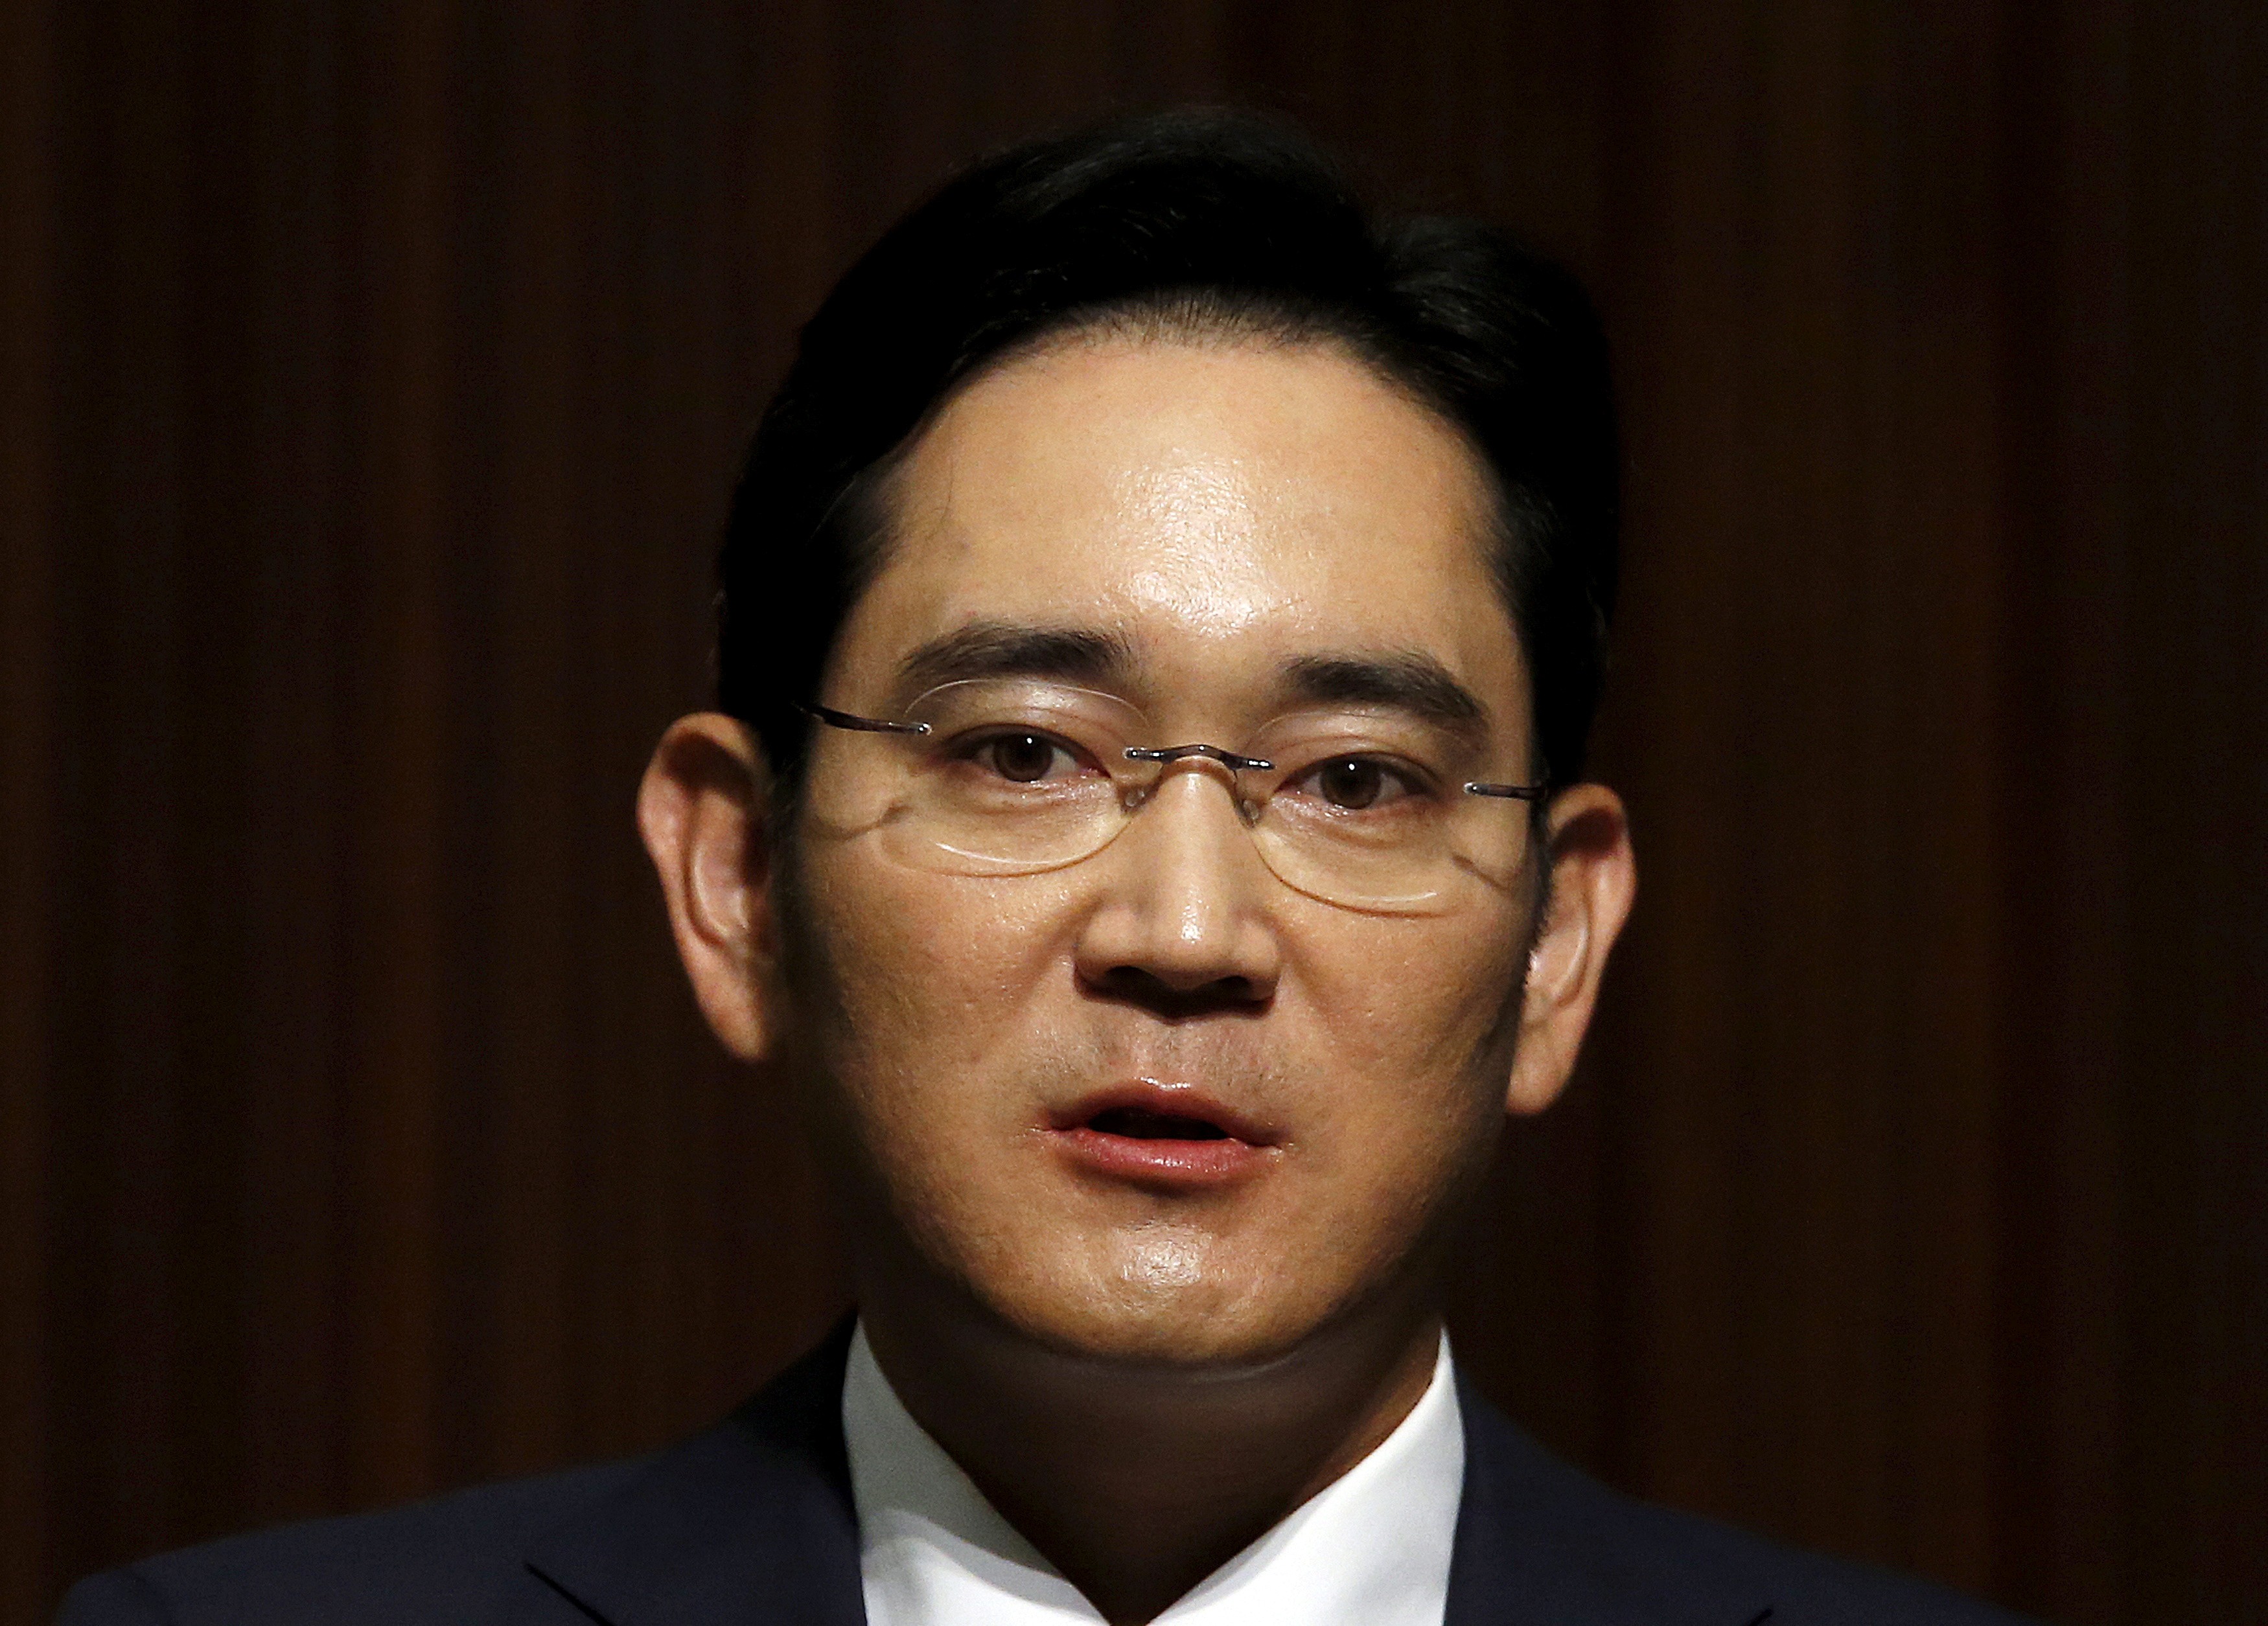 Samsung vice-chairman Jay Y. Lee, otherwise known as Lee Jae-yong. Photo: Reuters